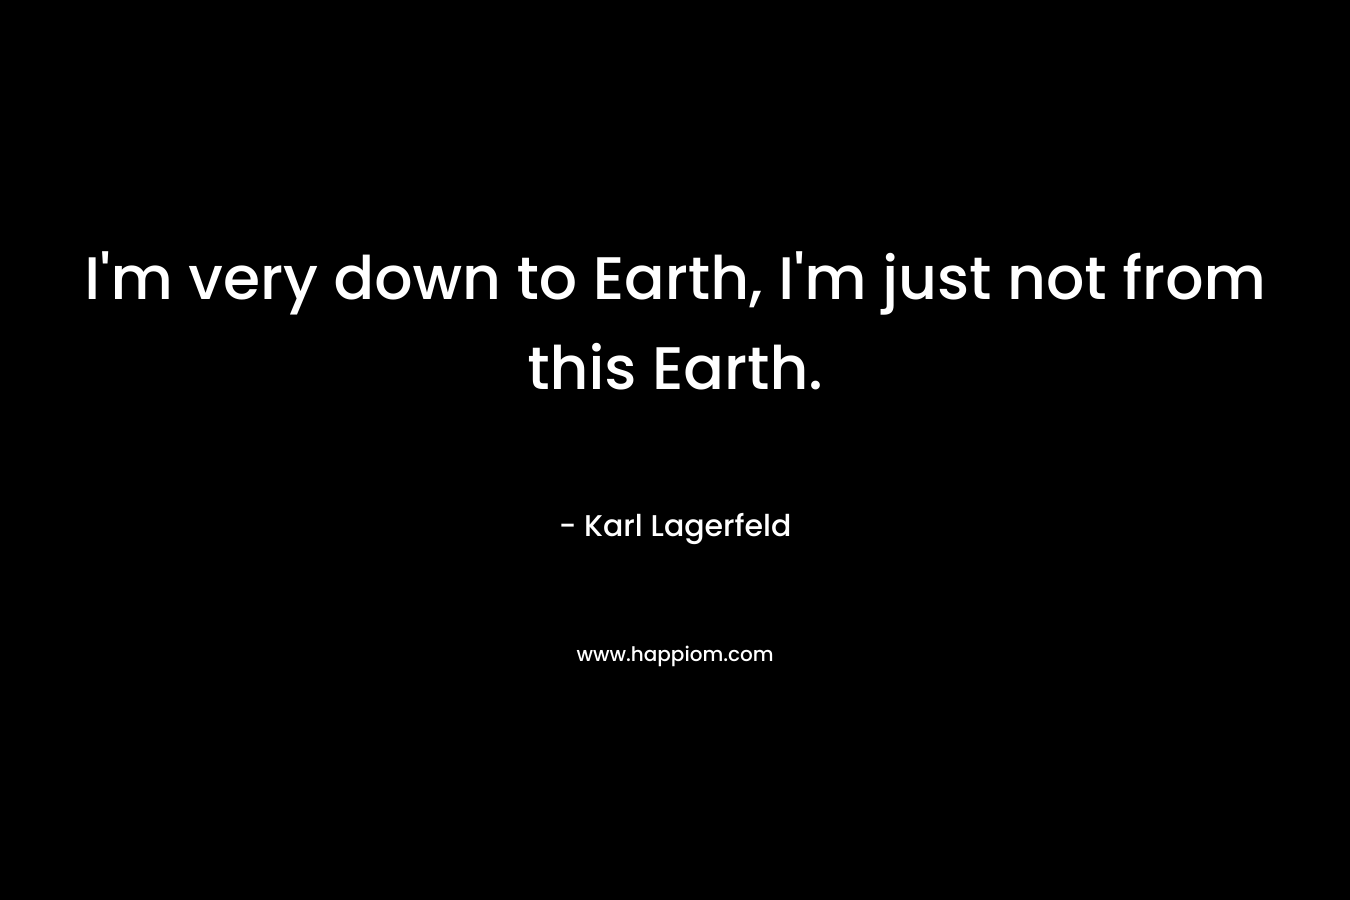 I’m very down to Earth, I’m just not from this Earth. – Karl Lagerfeld